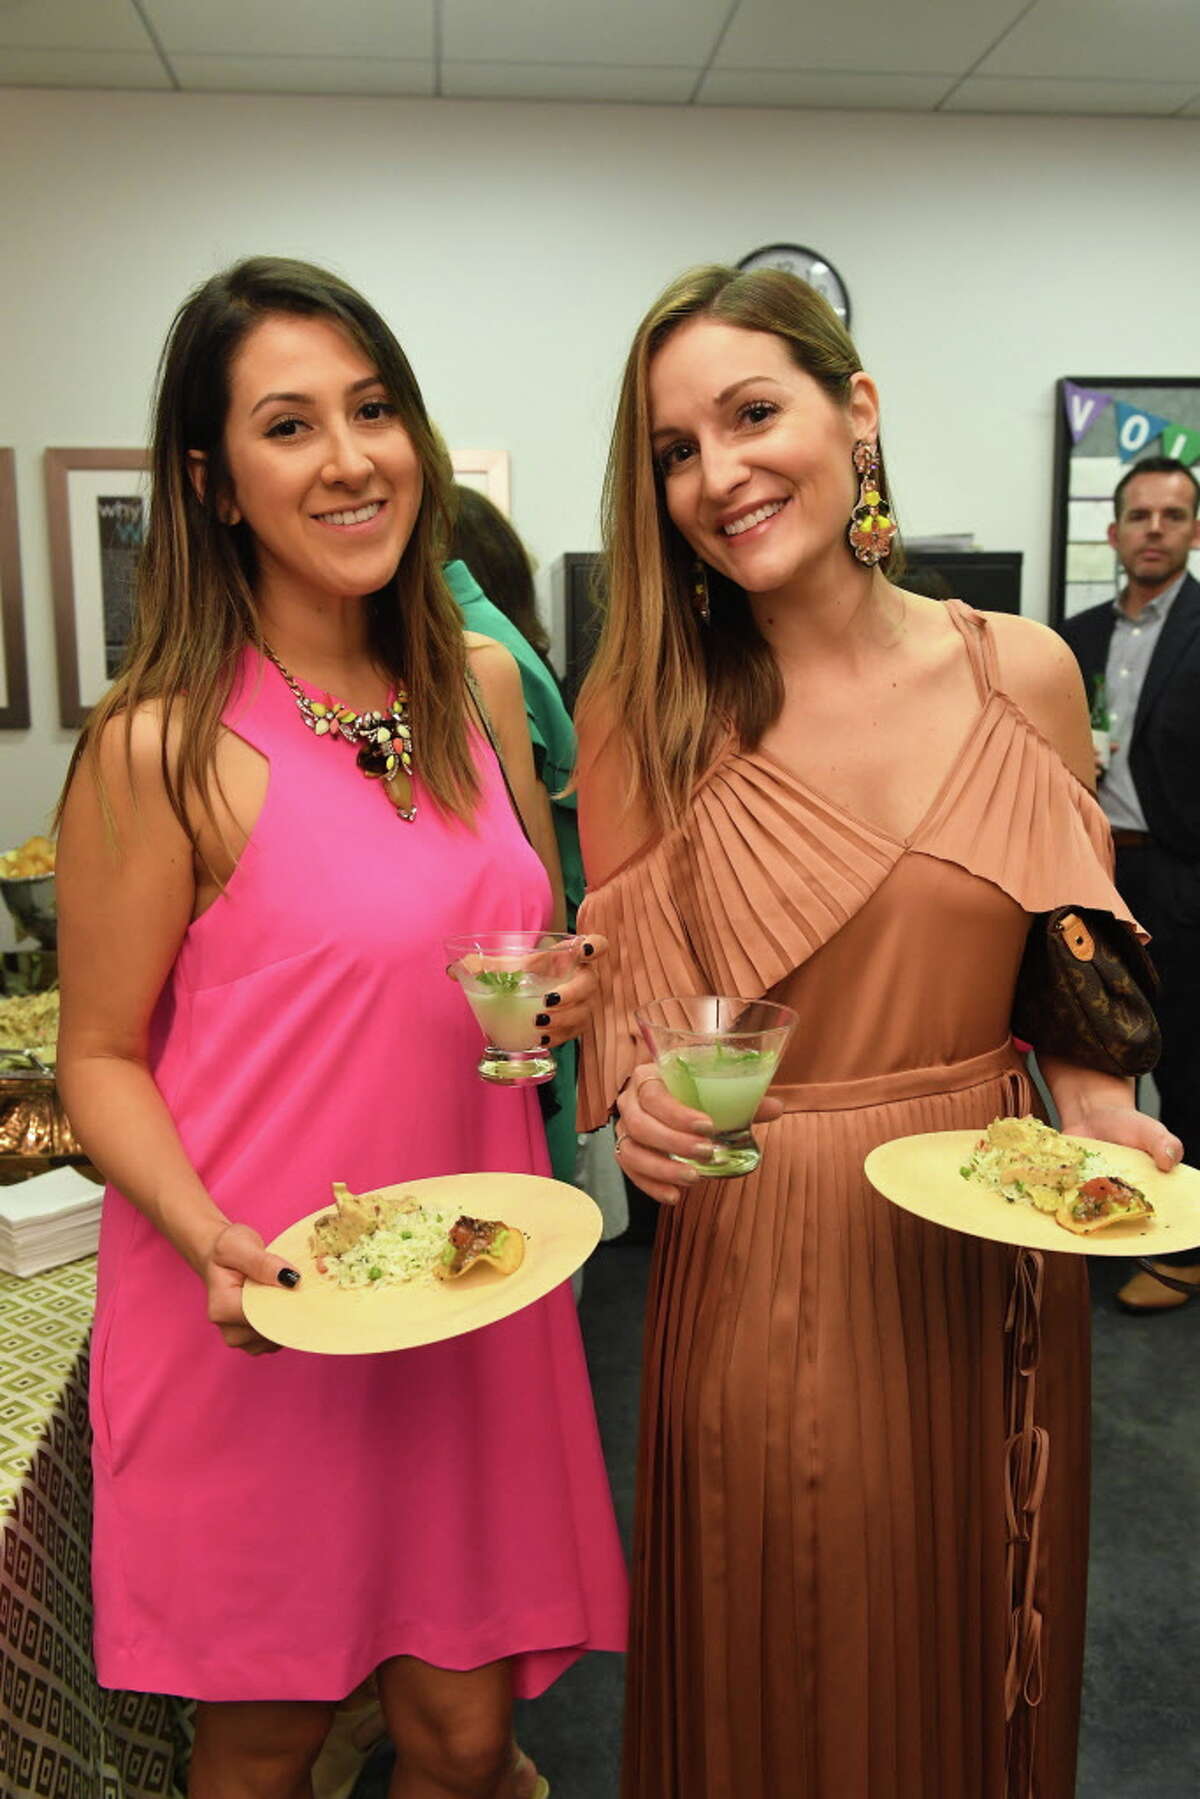 AVDA Home Safe Home, Dress for Success Houston Cuisine for a Cause, and the Epicurean Project held foodie philanthropy events this fall